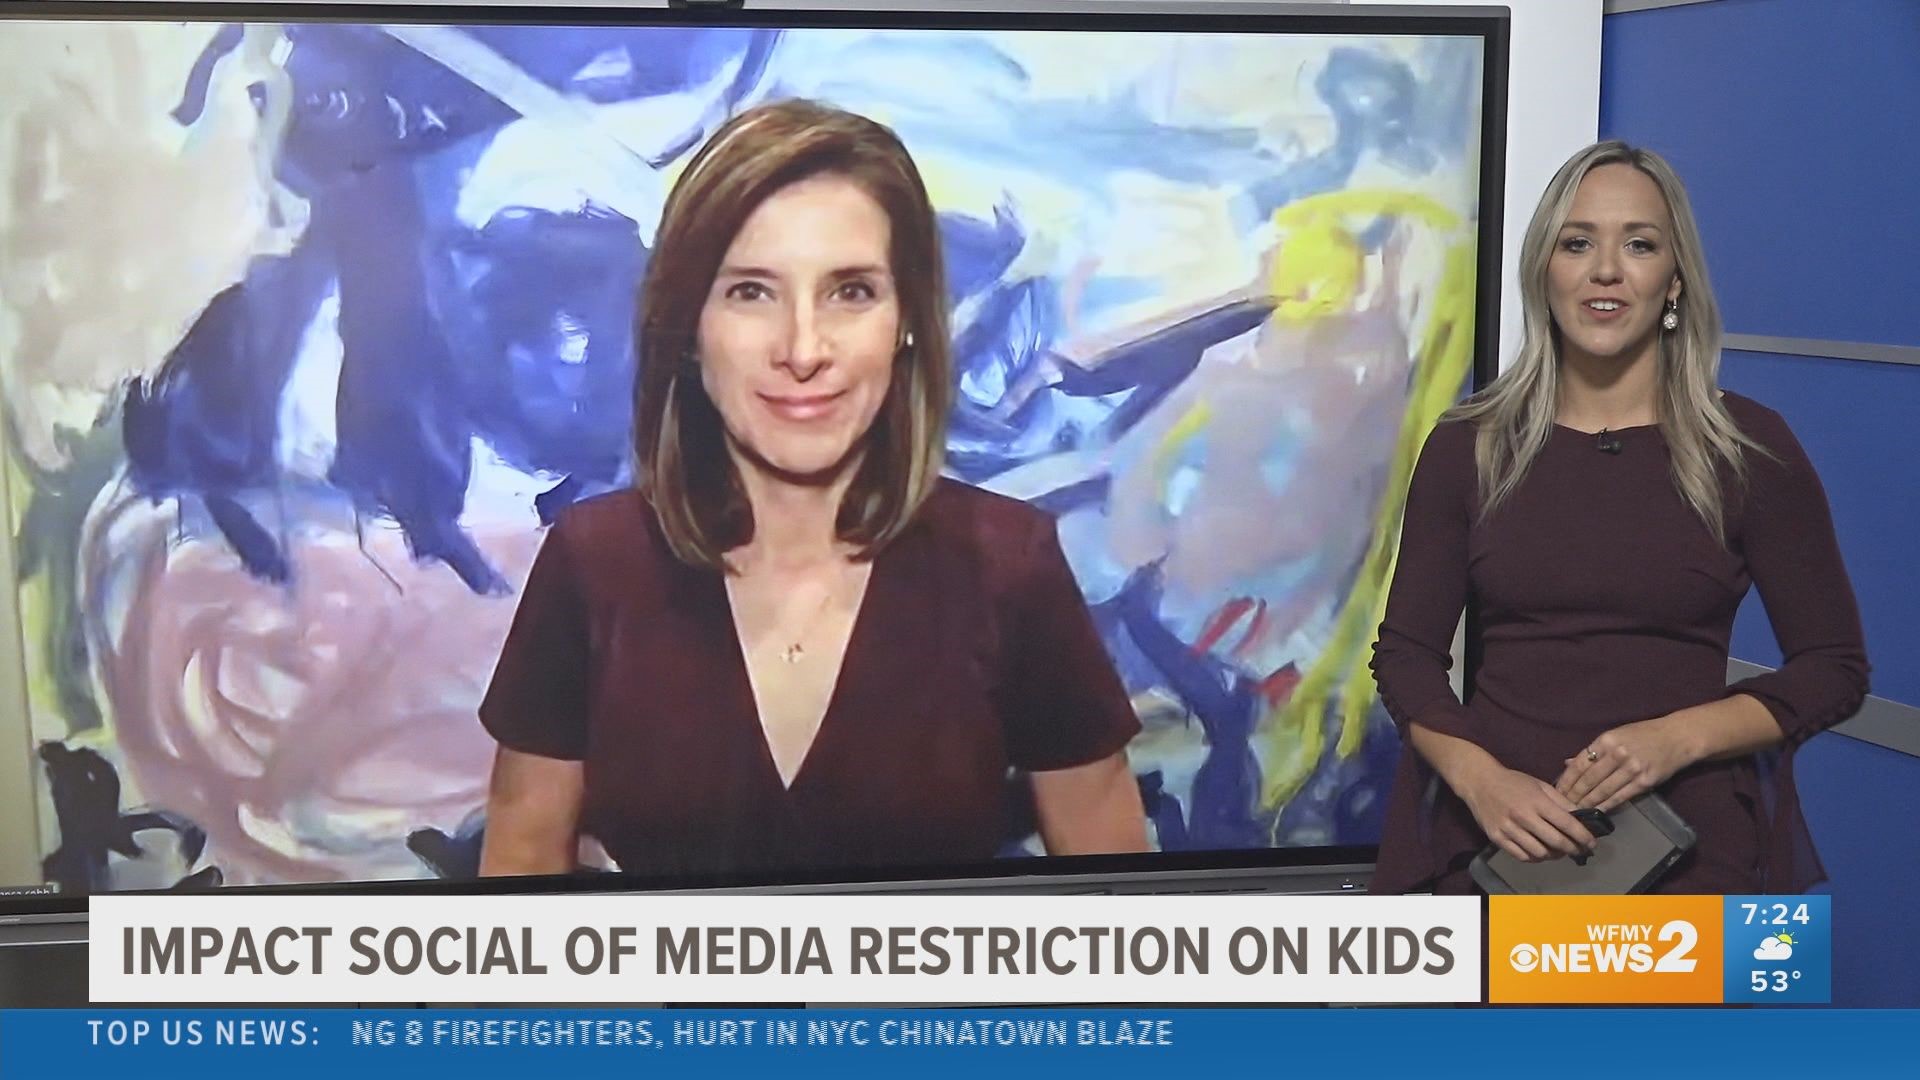 Blanca Cobb, who has a master’s degree in psychology, takes a look at how banning social media can impact kids.